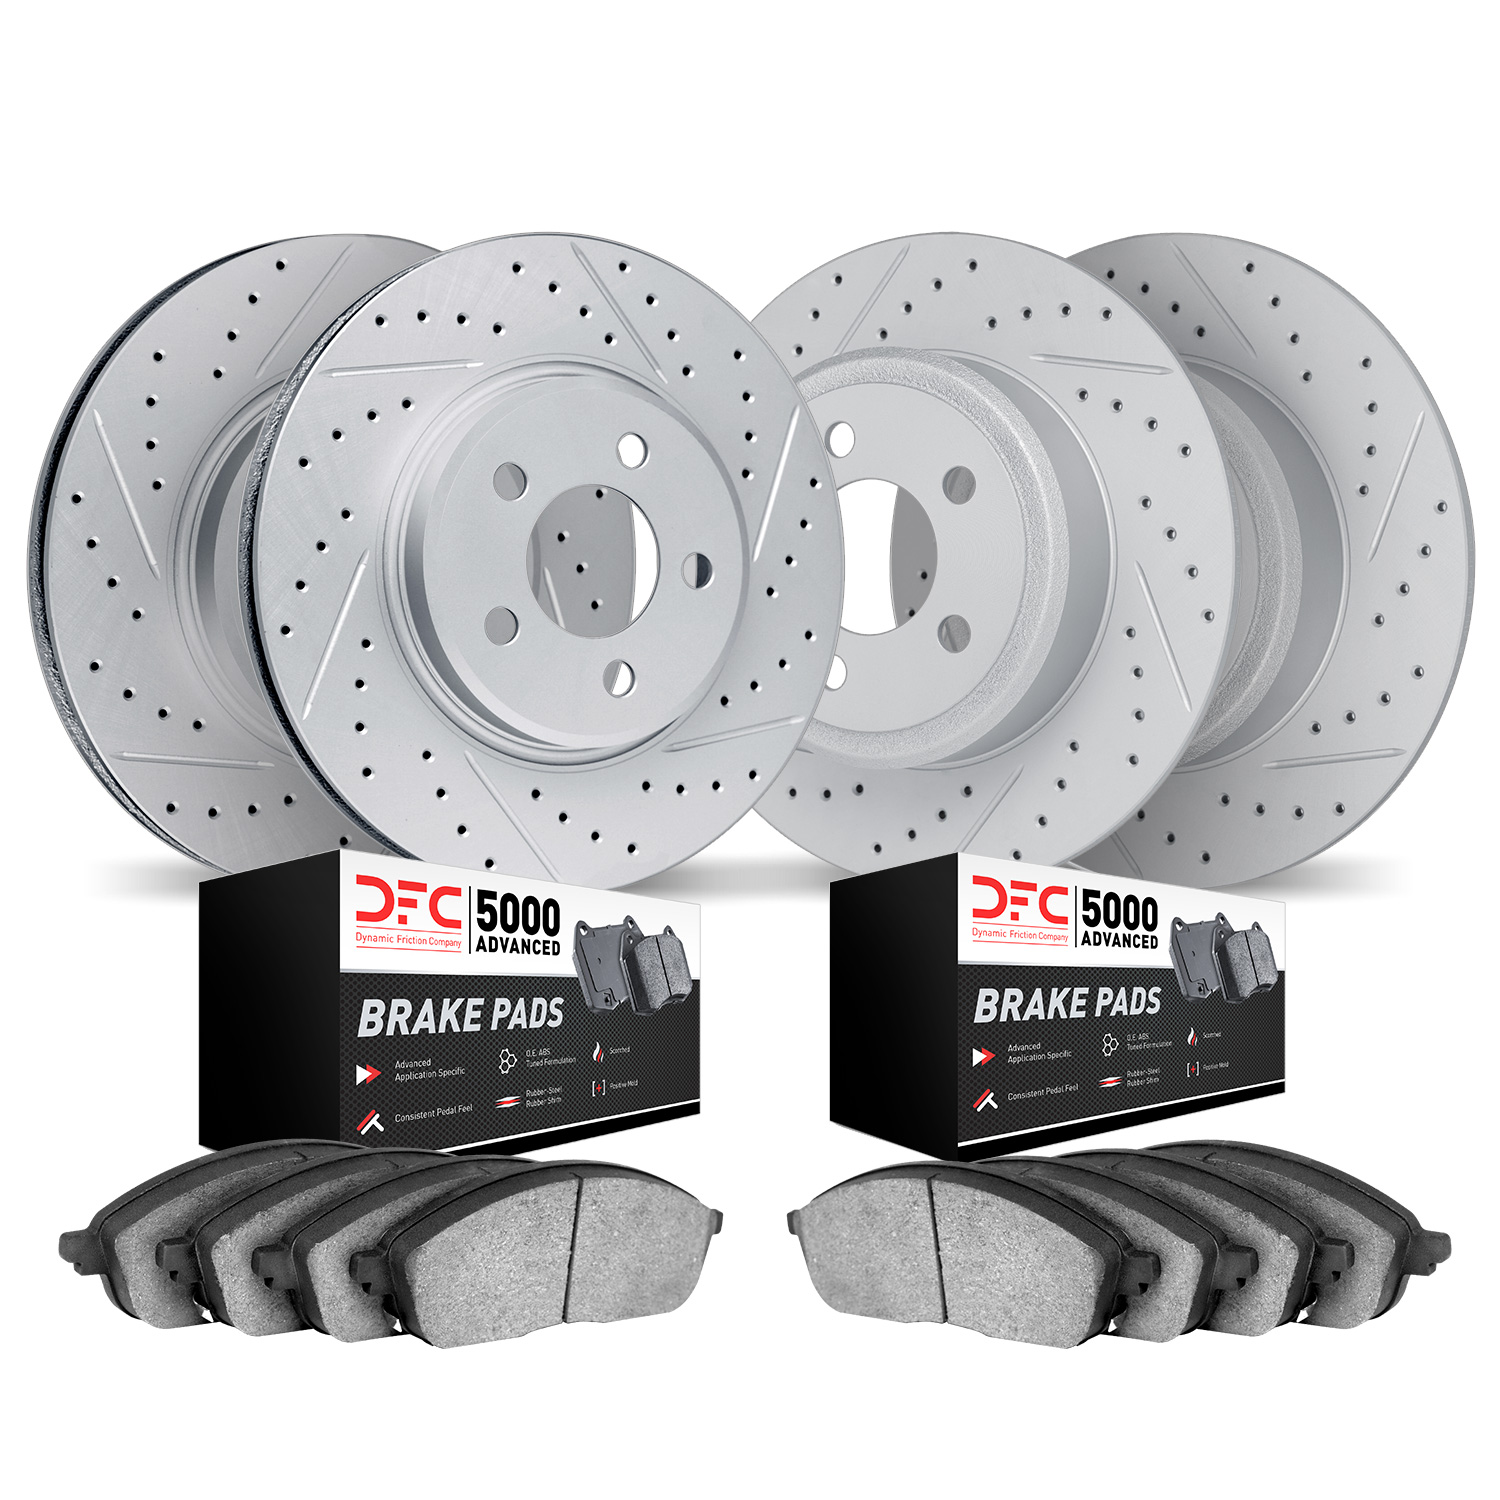 2504-76082 Geoperformance Drilled/Slotted Rotors w/5000 Advanced Brake Pads Kit, 1992-1996 Lexus/Toyota/Scion, Position: Front a